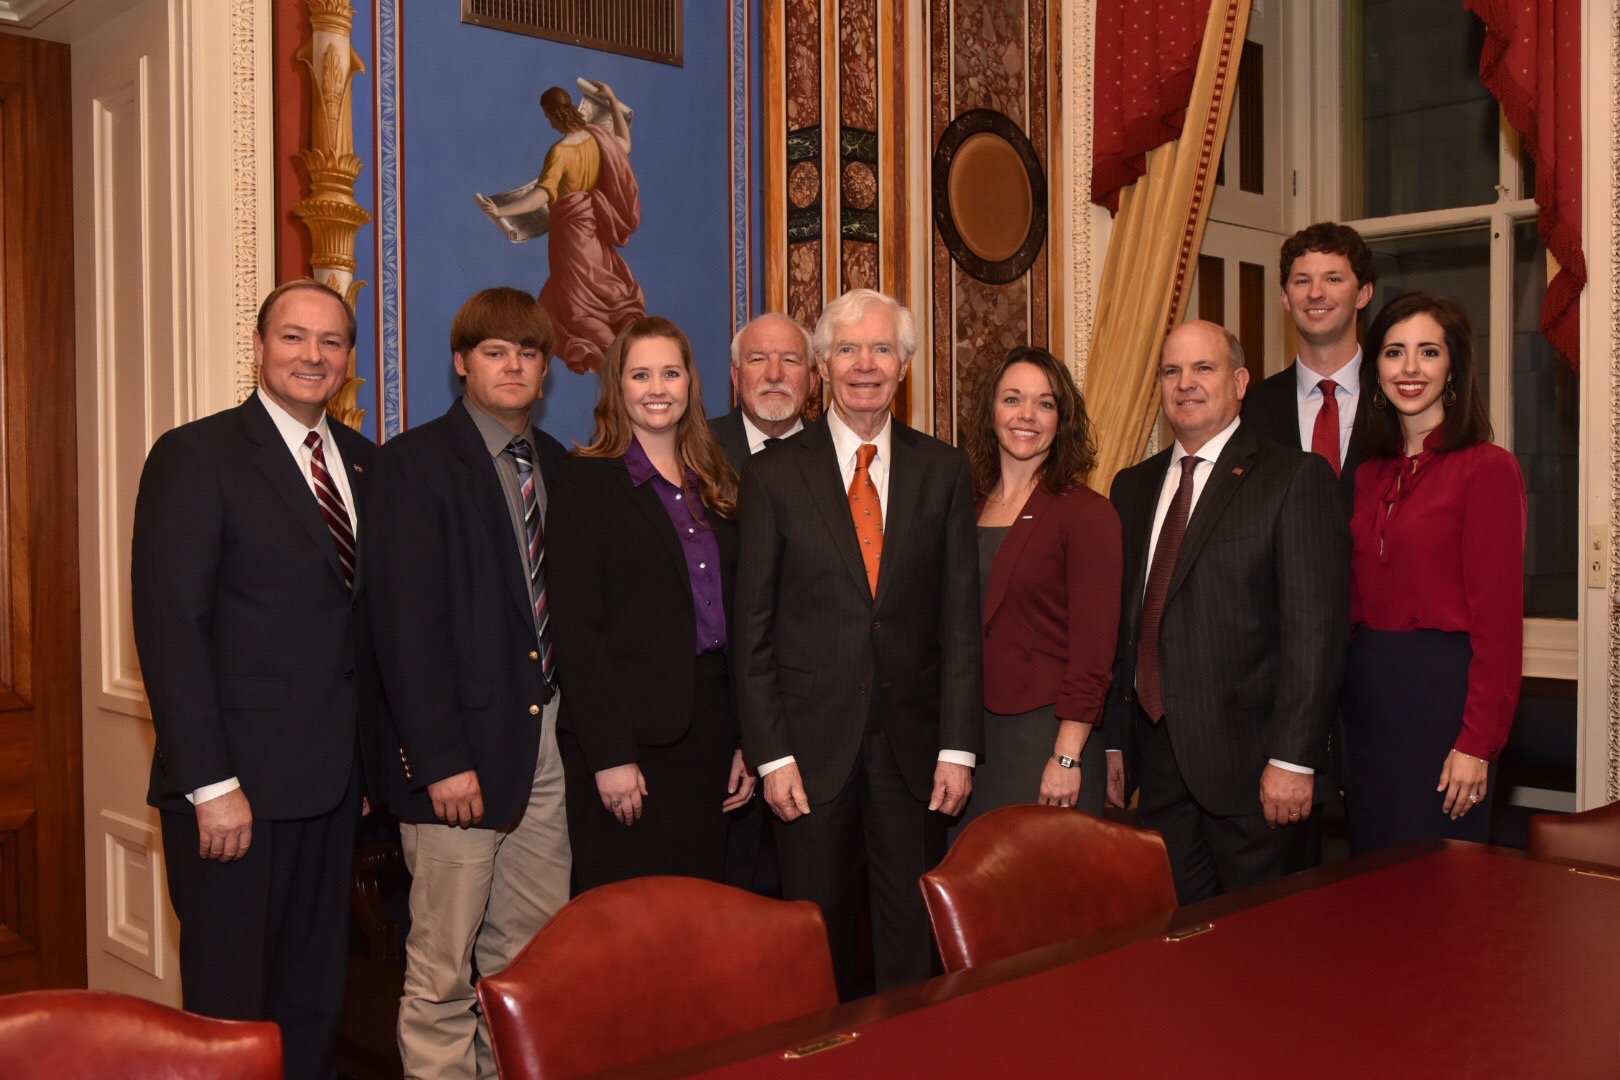 U.S. Sen. Thad Cochran, center, celebrates the establishment of the Thad Cochran Agricultural Leadership Program, a collaboration between the Mississippi State University Extension Service and Mississippi Farm Bureau. Joining him are, from left: MSU Presi